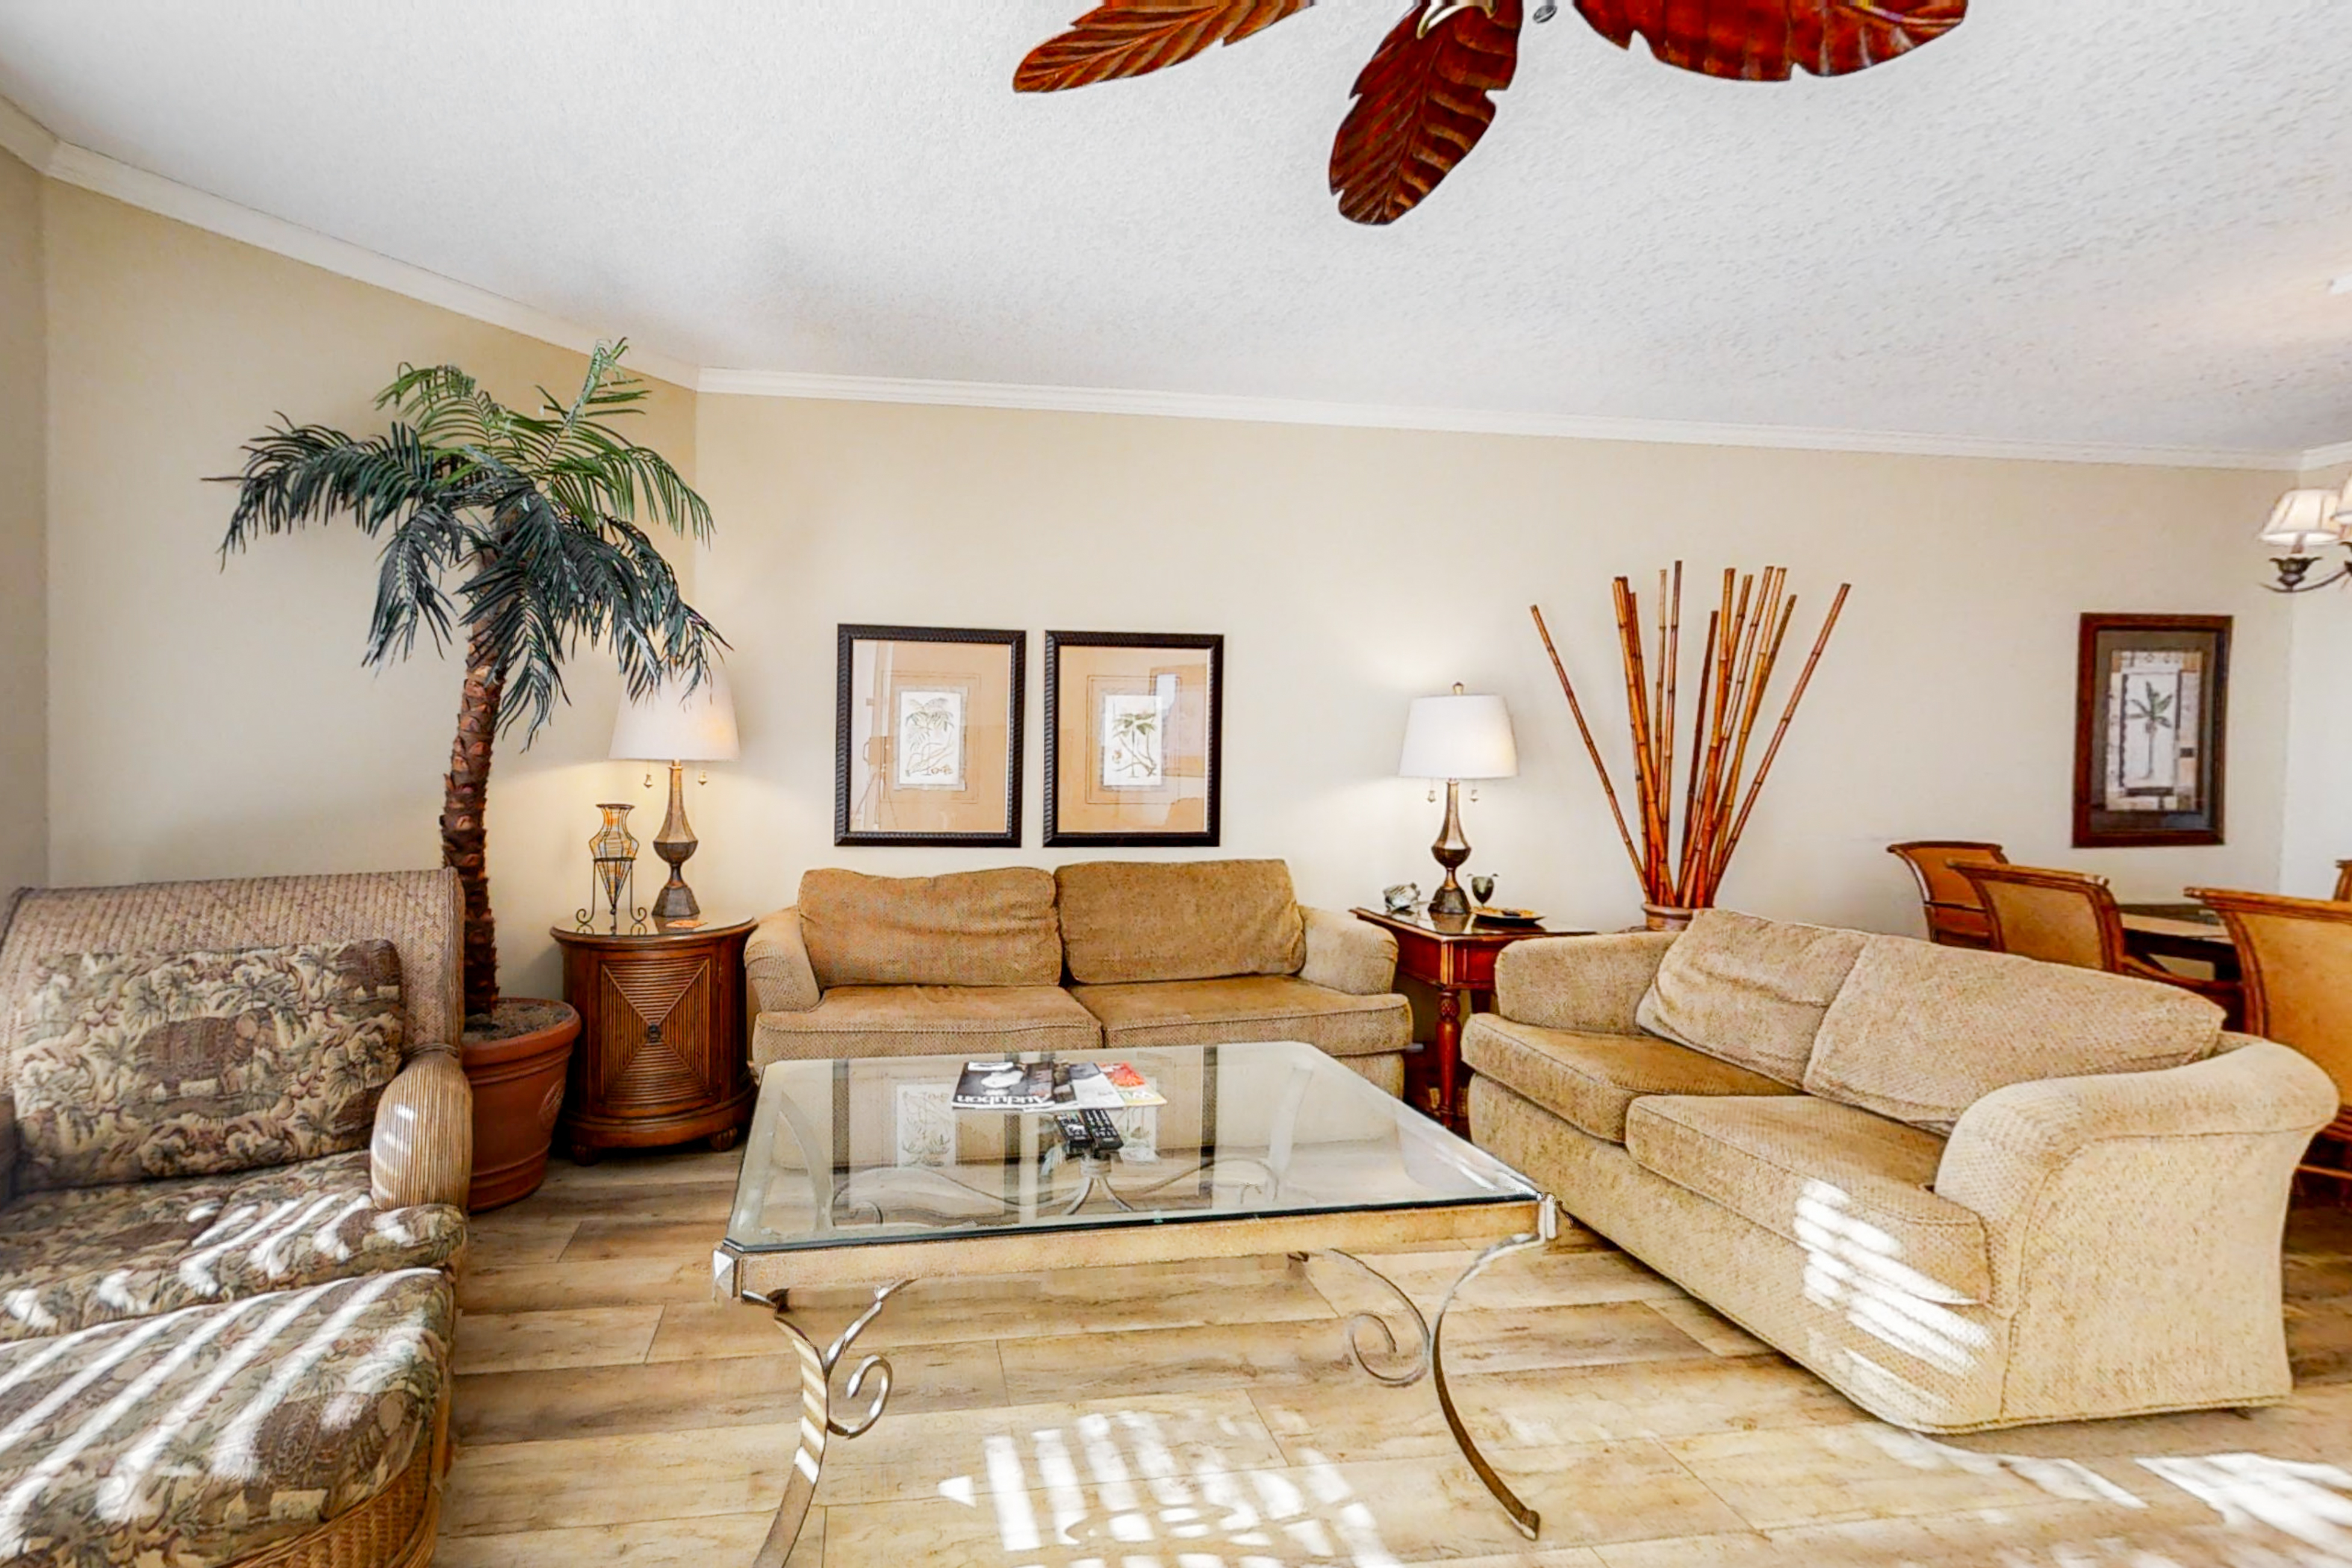 Dunes of Seagrove A108 Condo rental in Dunes of Seagrove in Highway 30-A Florida - #2